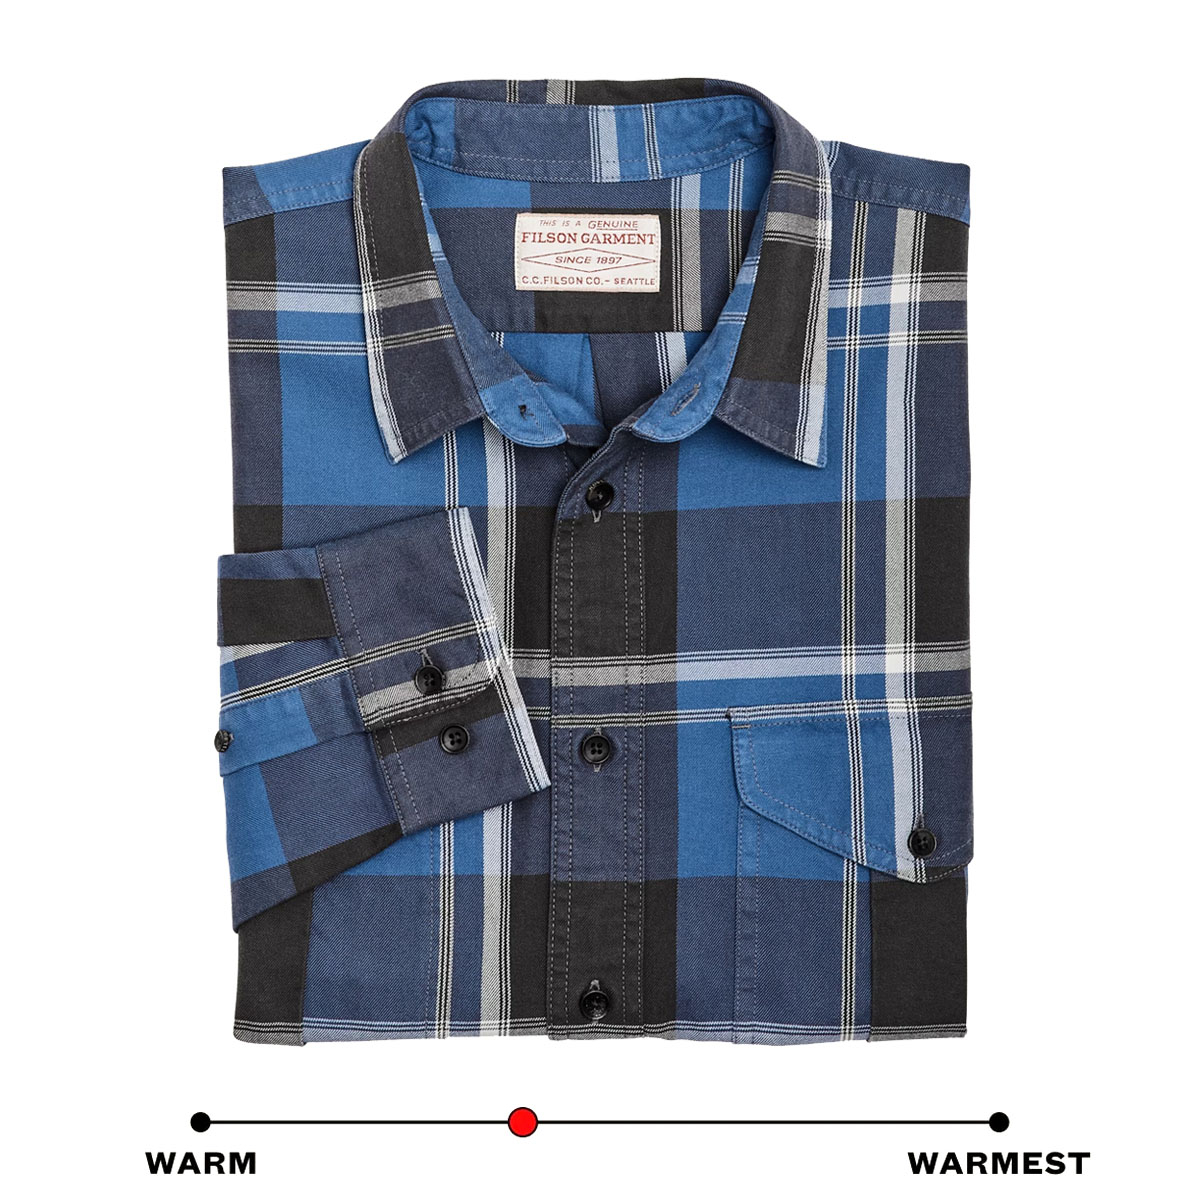 Filson Lightweight Alaskan Guide Shirt Blue/Faded Black/White Plaid, setting the standard for year-round versatility and comfort in an outdoor shirt